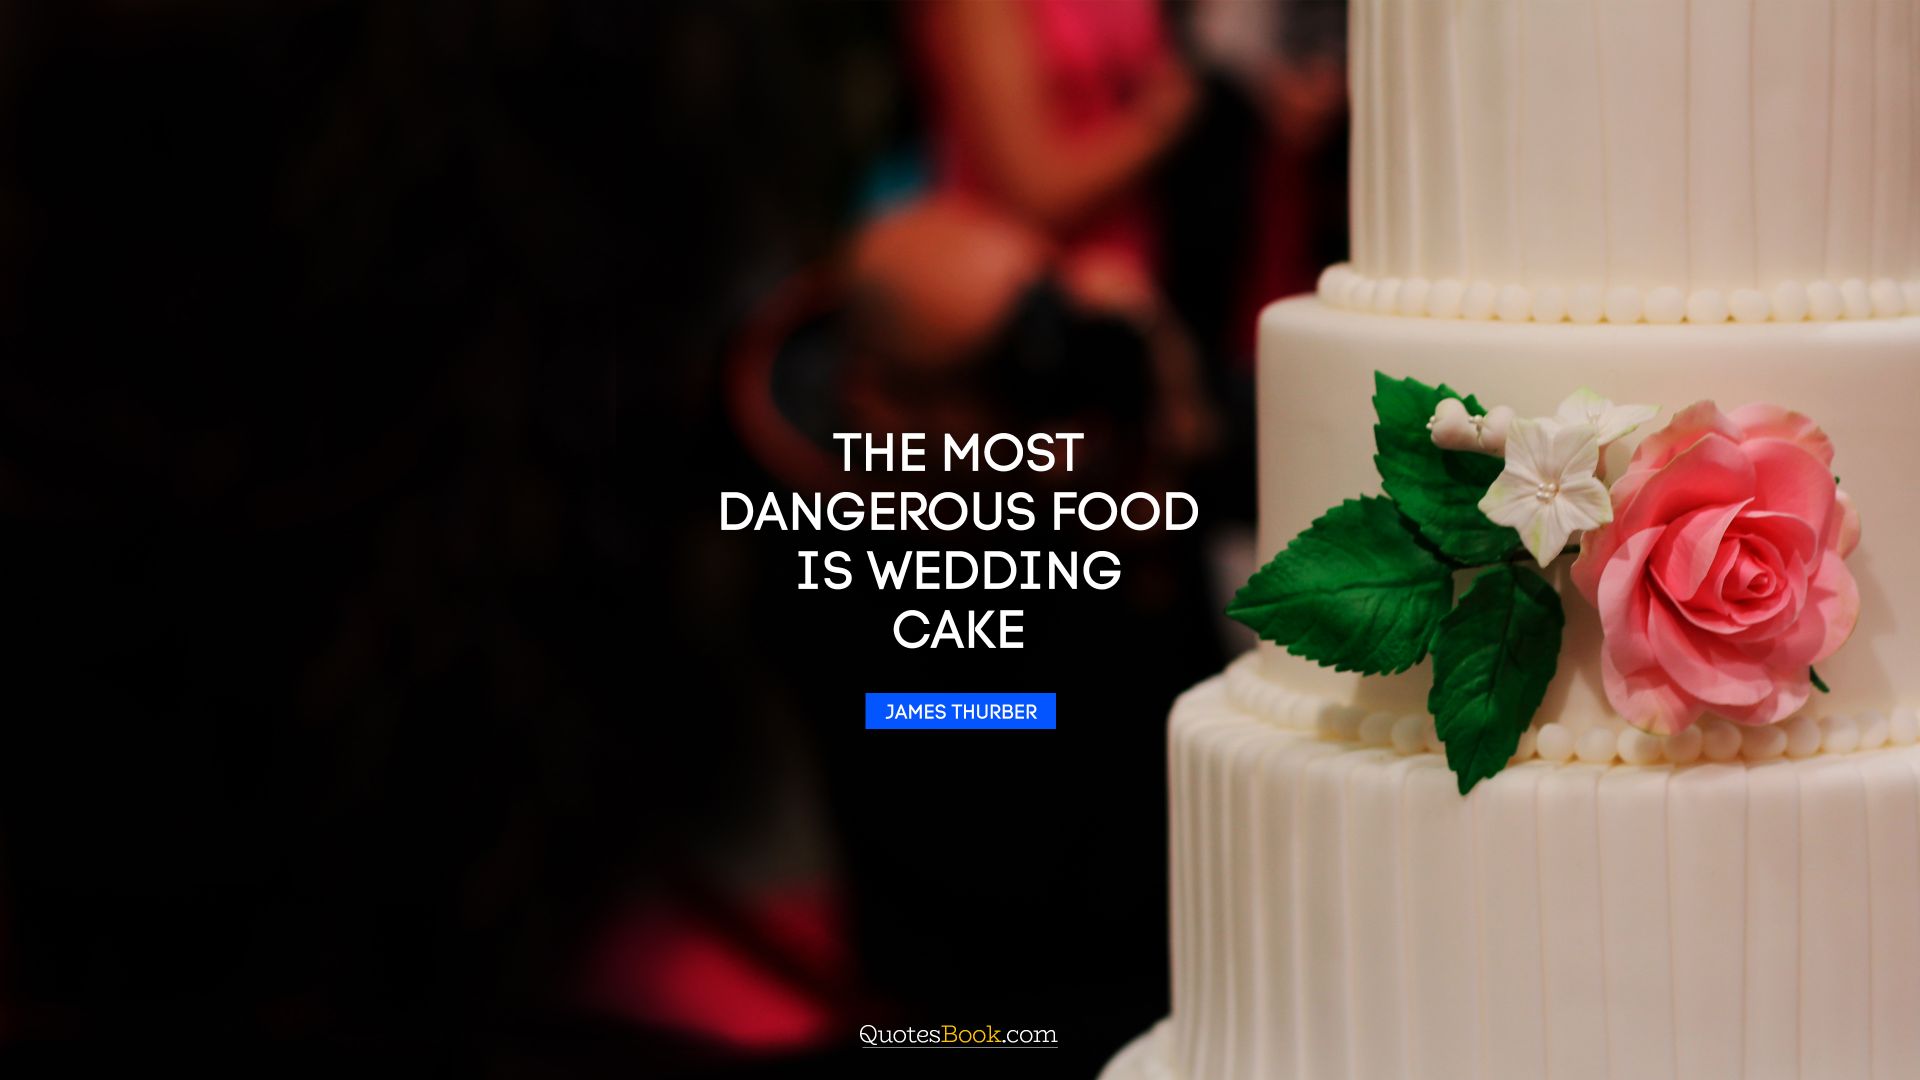 The most dangerous food is wedding cake. - Quote by James Thurber